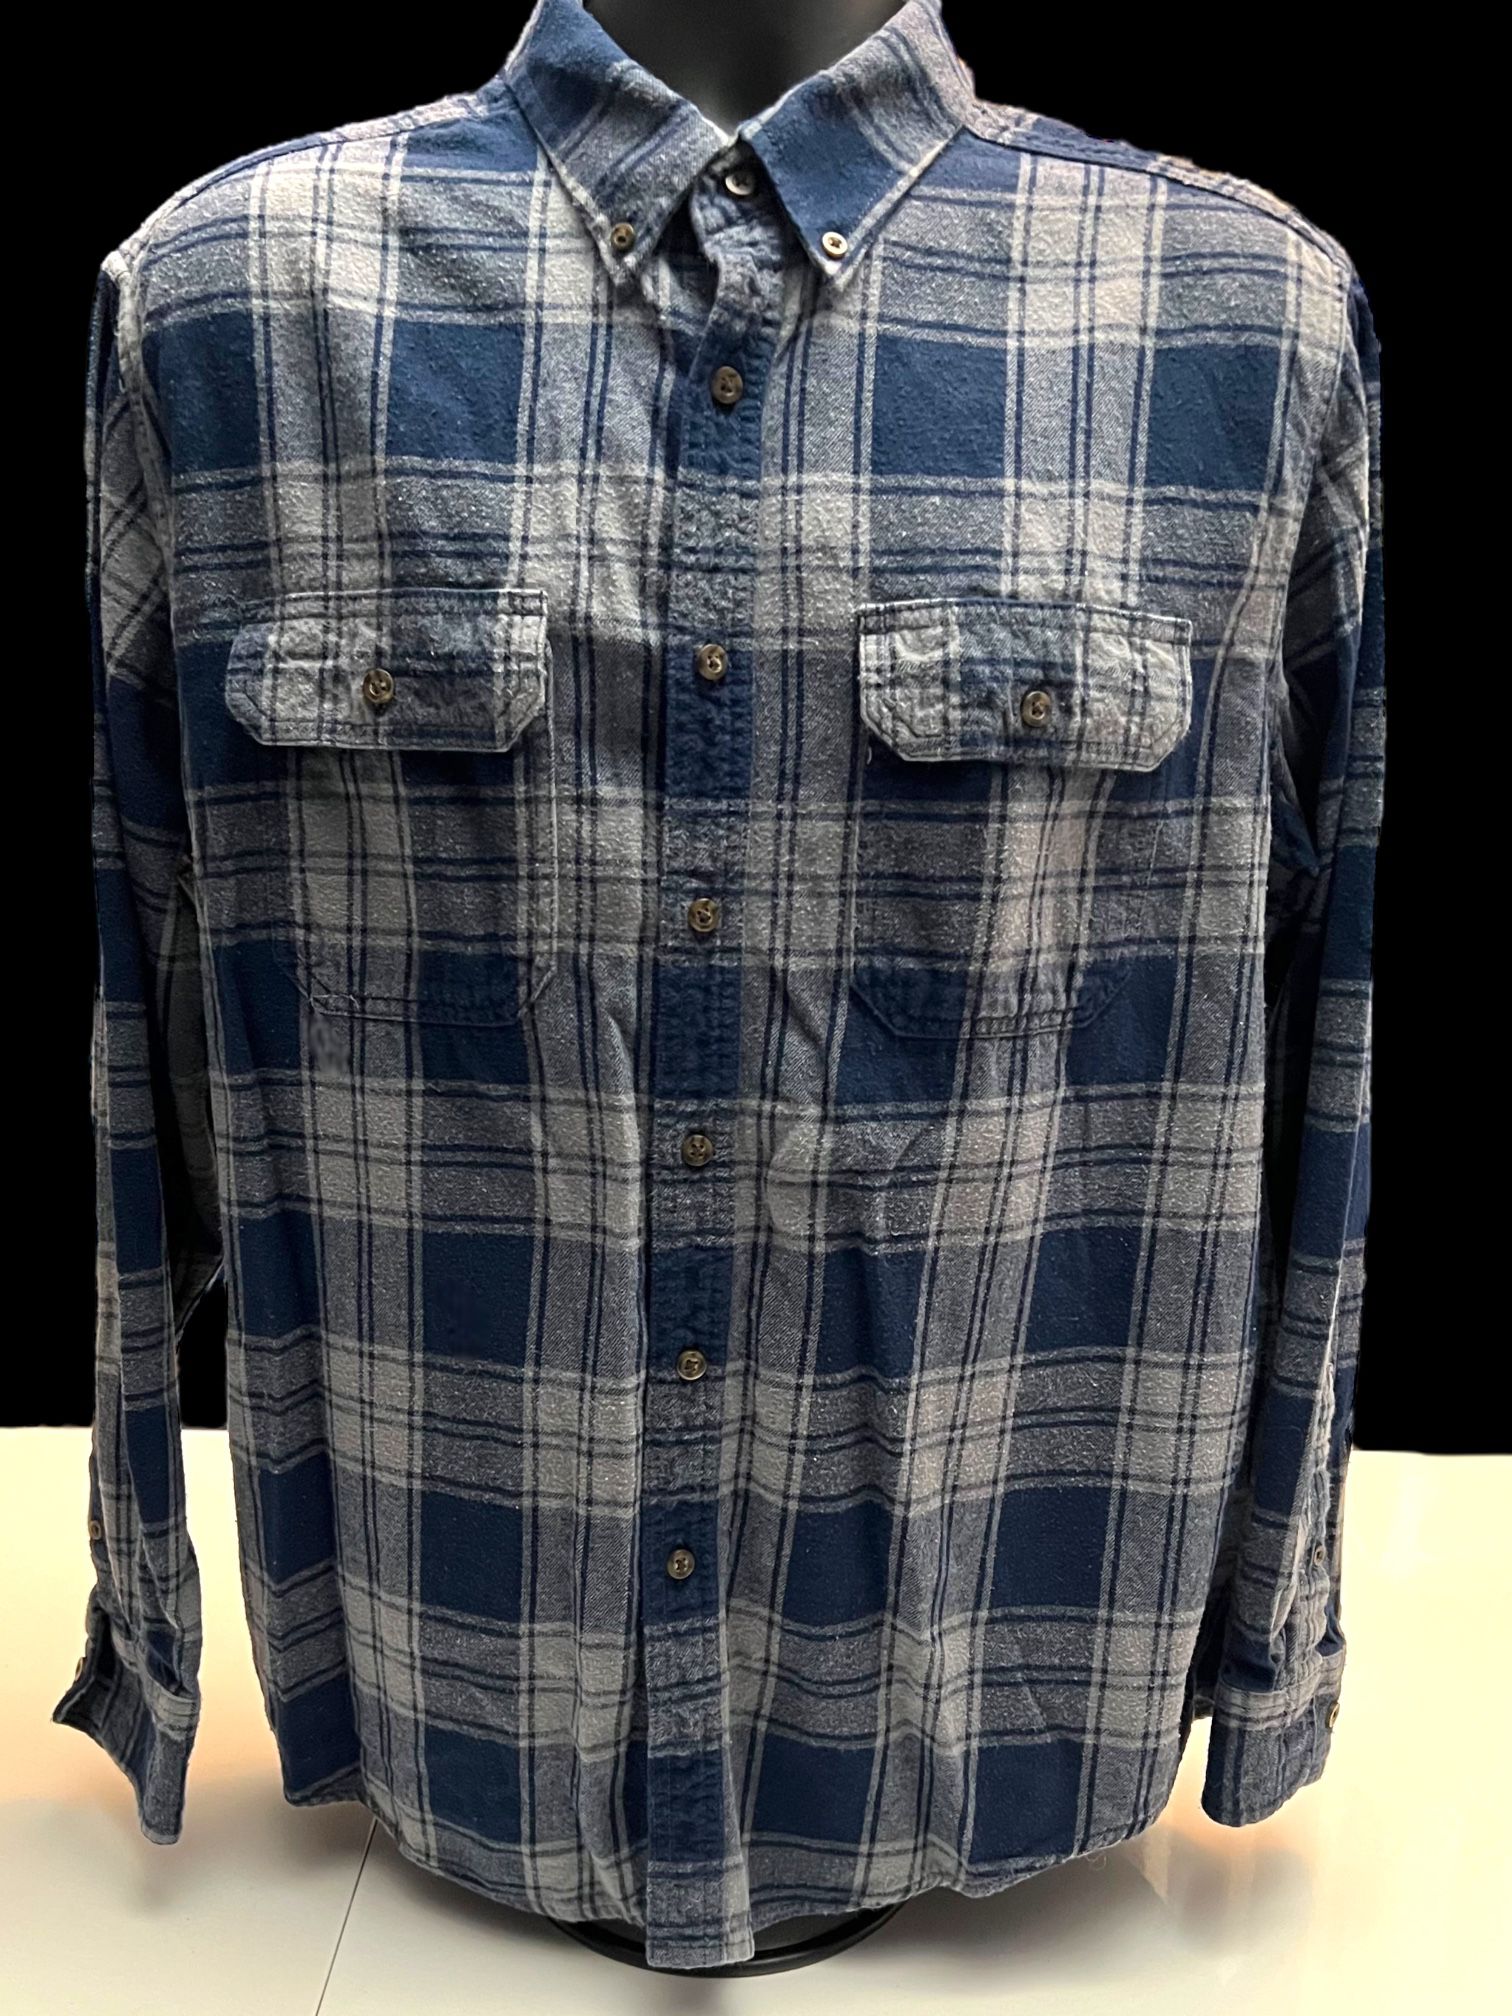 Faded Glory Blue Plaid Flannel Button Down Shirt Size Large 42-44 Outdoor Casual Workwear Men